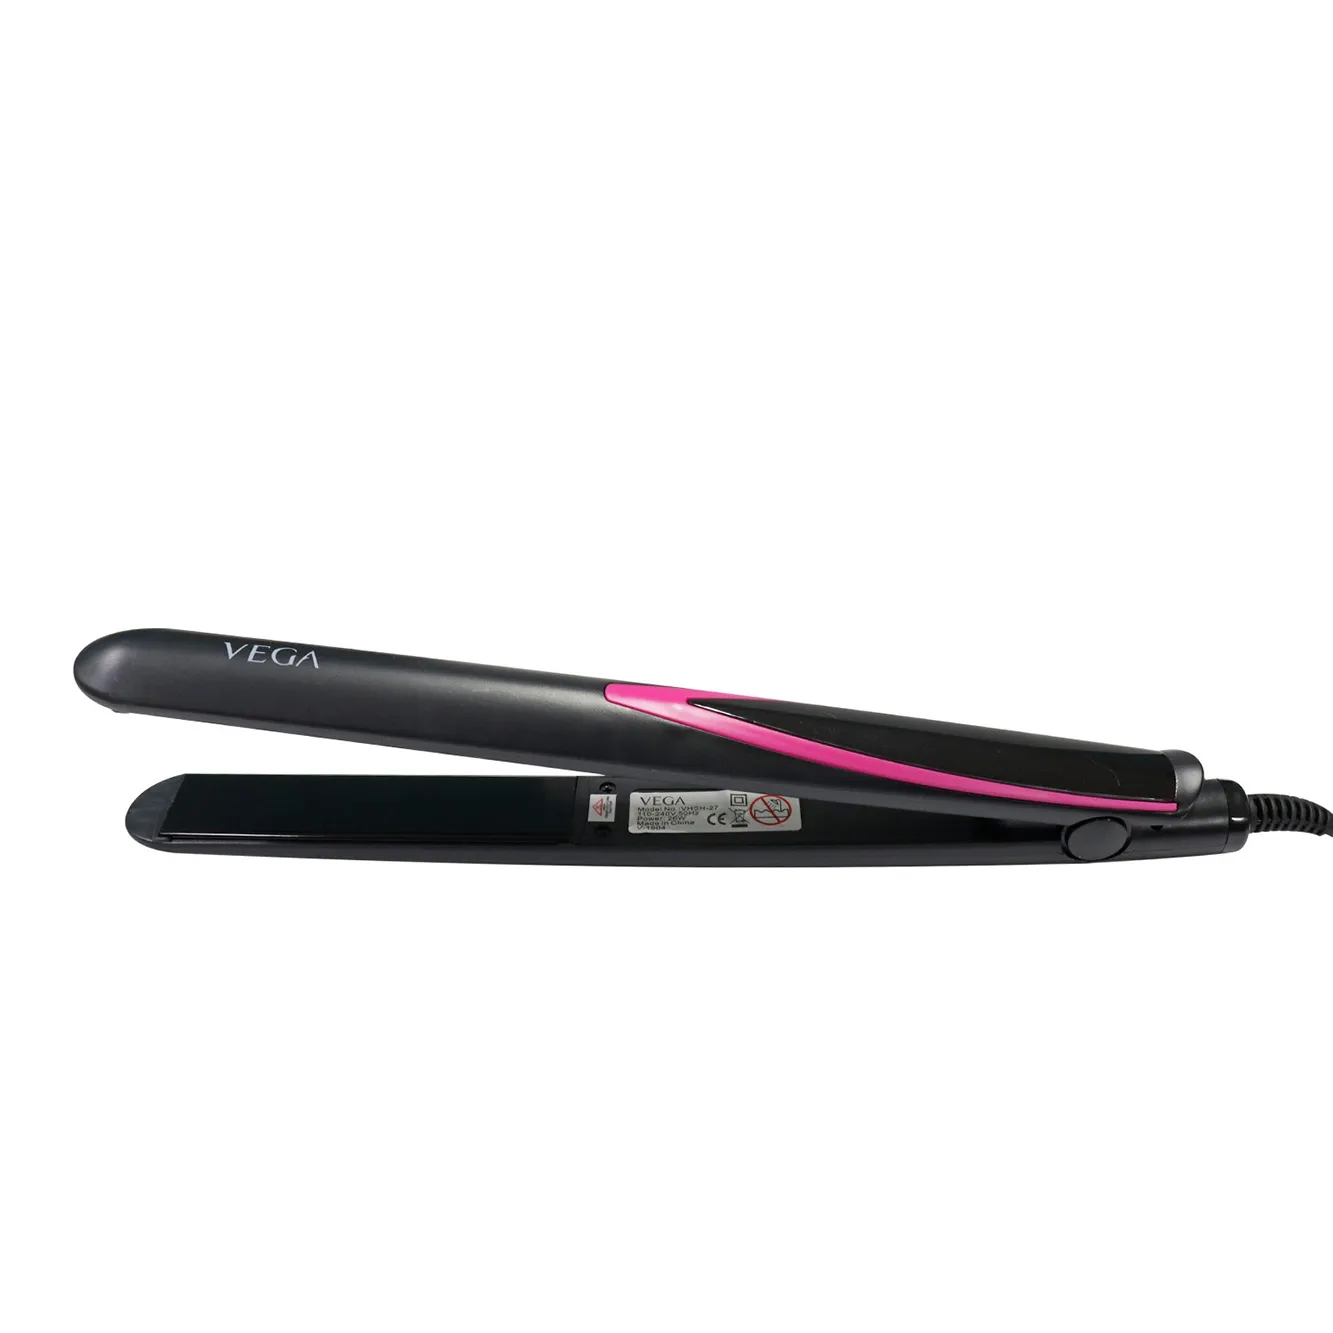 Buy VEGA 2 in 1 Wet and Dry Hair Styler Straightener and Curler VHSC02  White 1 gm Online at Best Price  MultiStylers